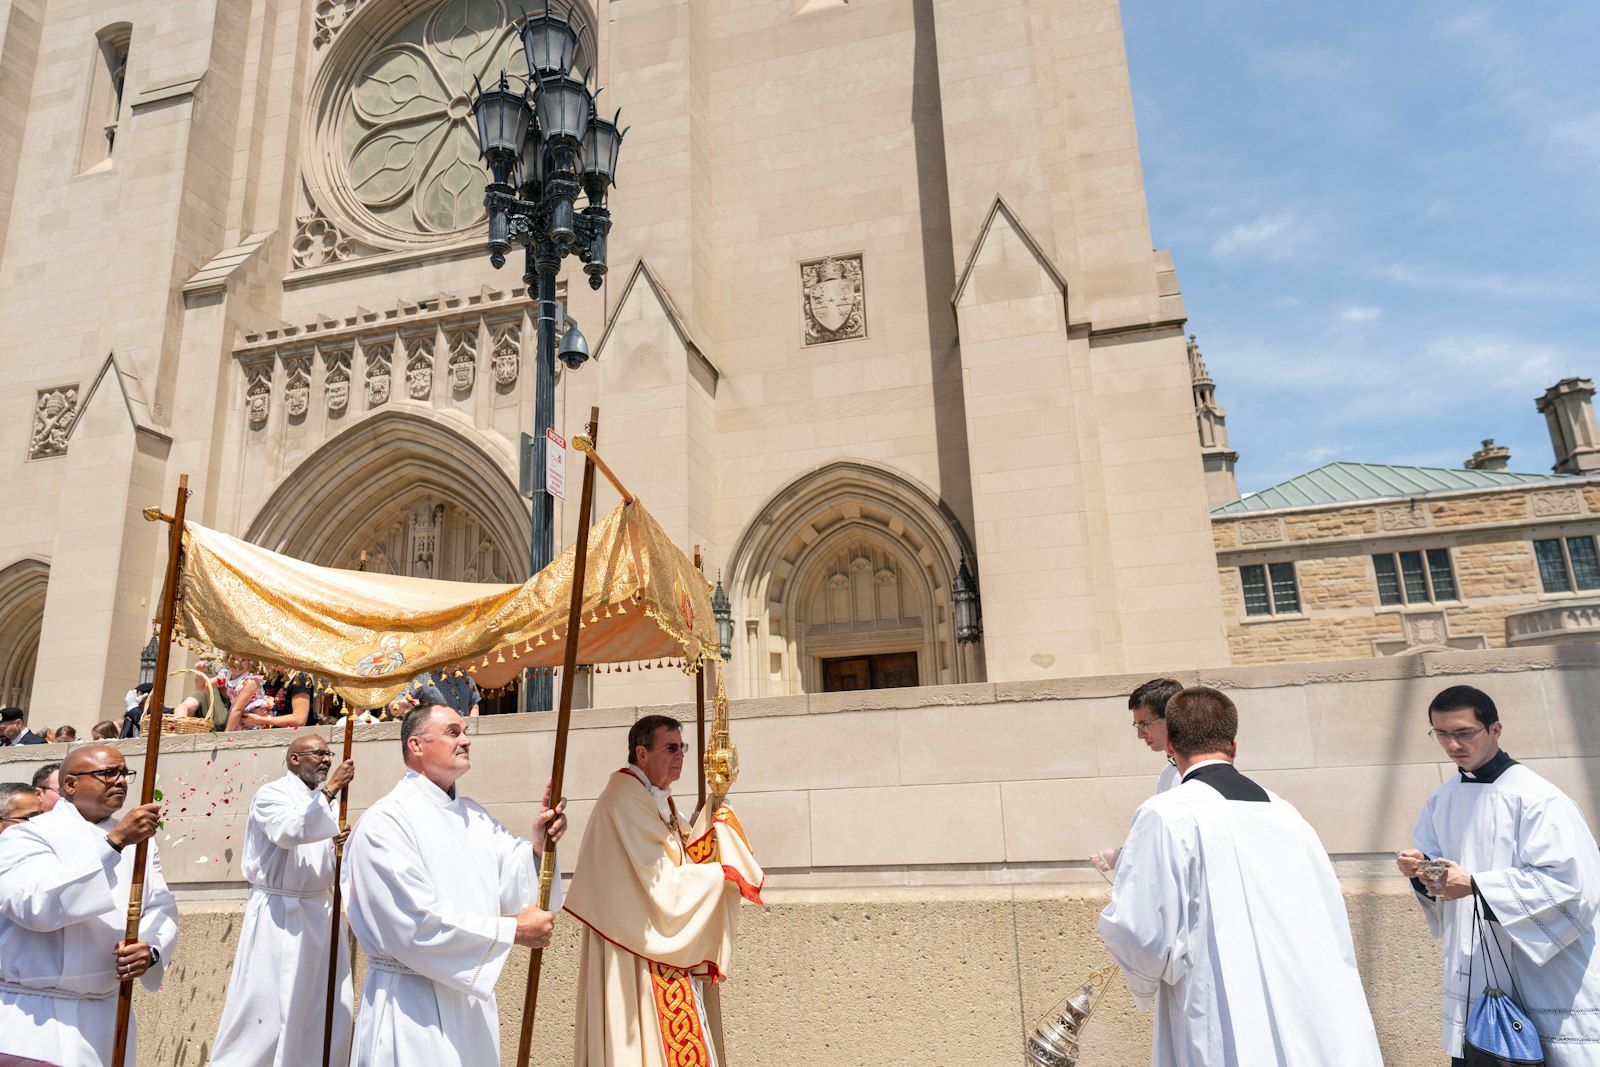 People throw flower petals from the porch of the Cathedral of the Most Blessed Sacrament in Detroit as Archbishop Allen H. Vigneron carries the Eucharist in procession during the solemnity of Corpus Christi, June 19, 2022. (Melanie Reyes | Special to Detroit Catholic)